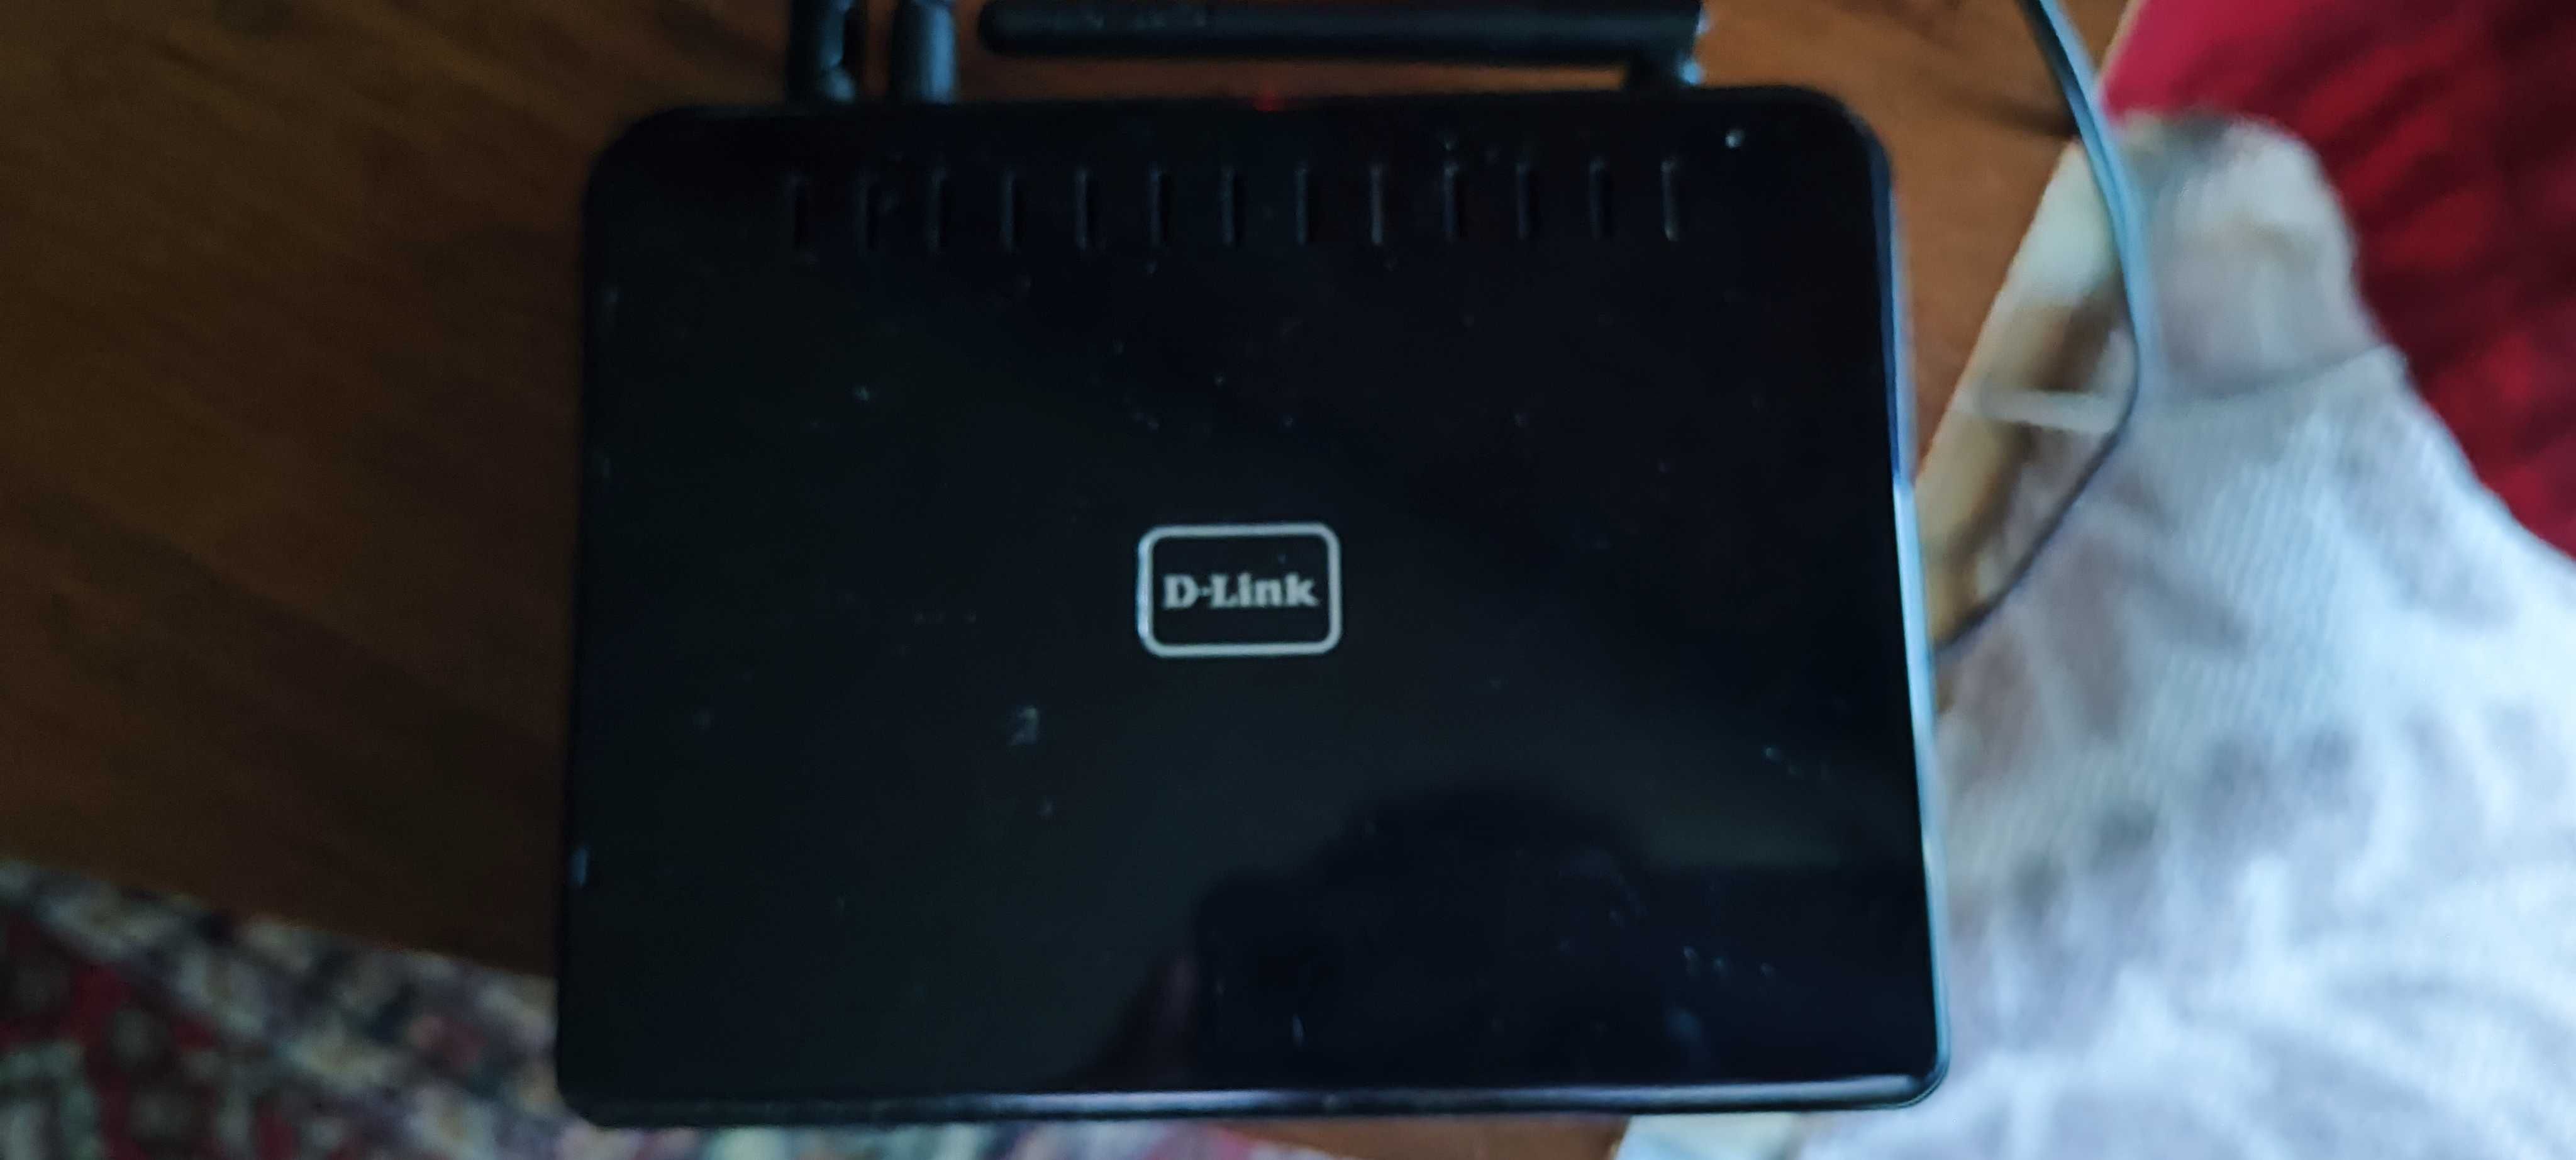 Настолен рутер D-link wireless and home router D-615